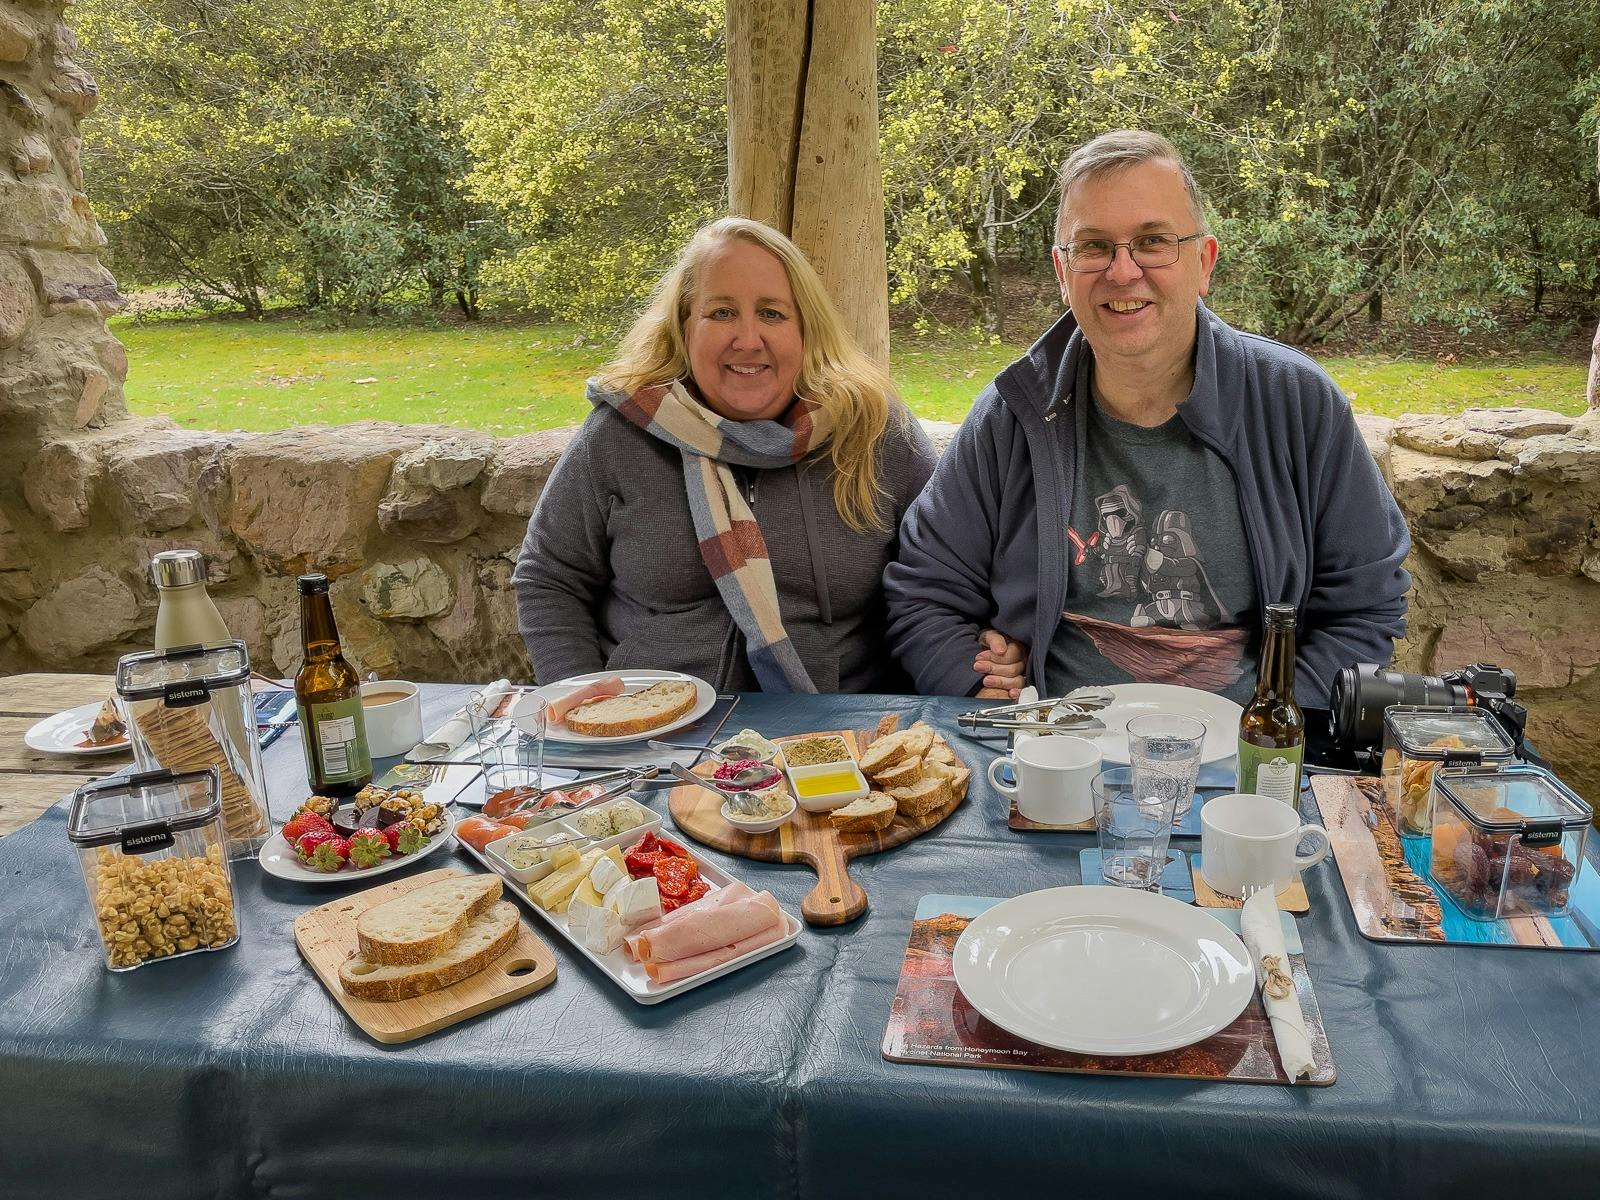 Deluxe picnic lunch featuring Tasmanian foodie delights